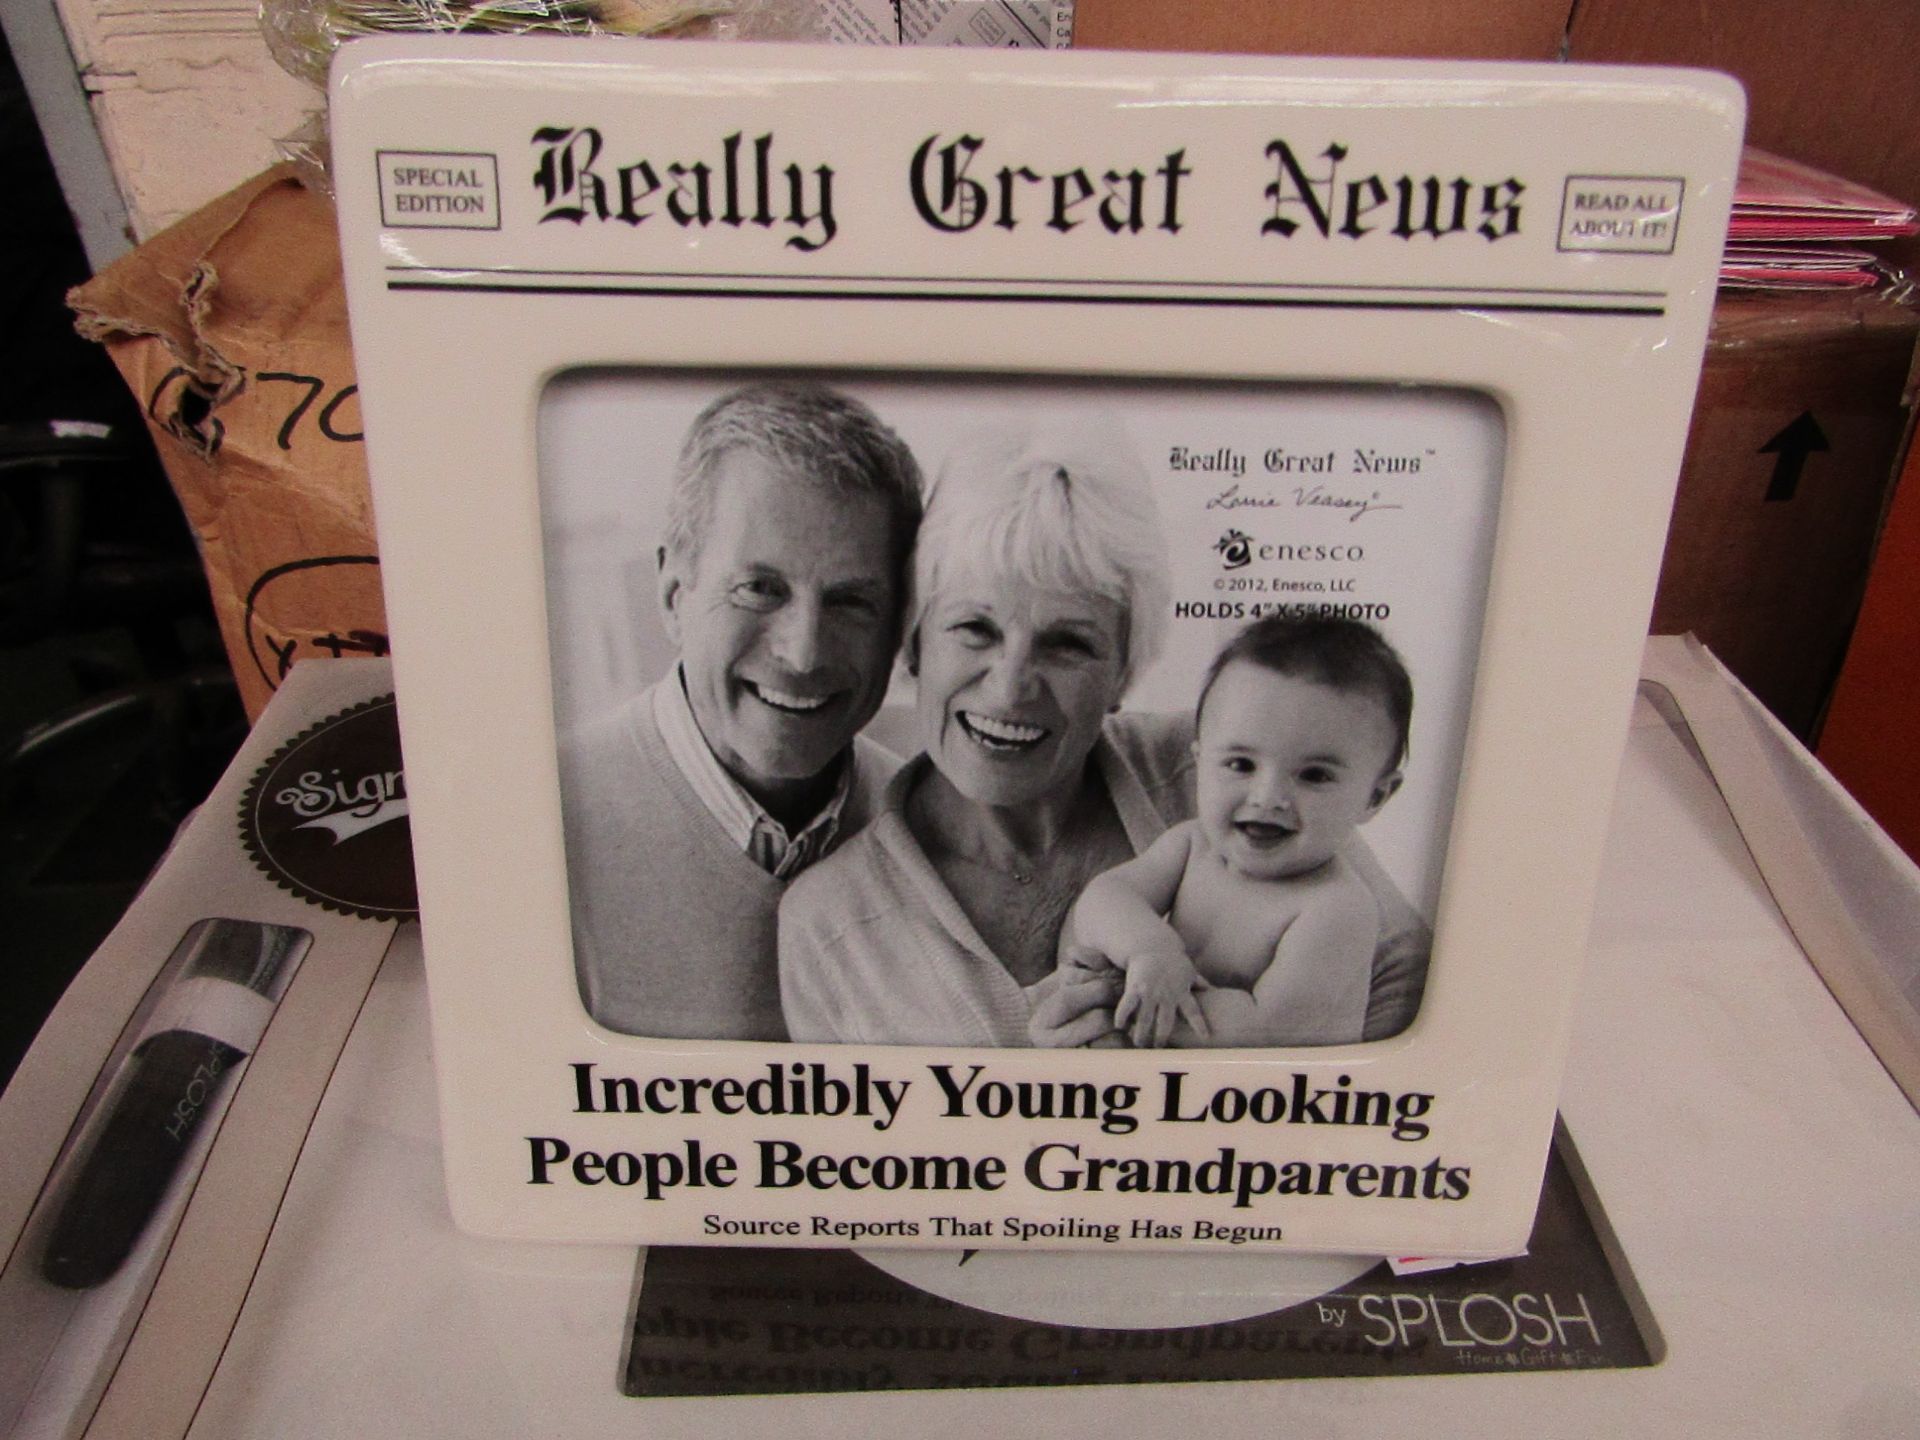 12x Ceramic News Style Picture Frames - Holds 4" x 5" Photos - Unused & Boxed. - See Image For